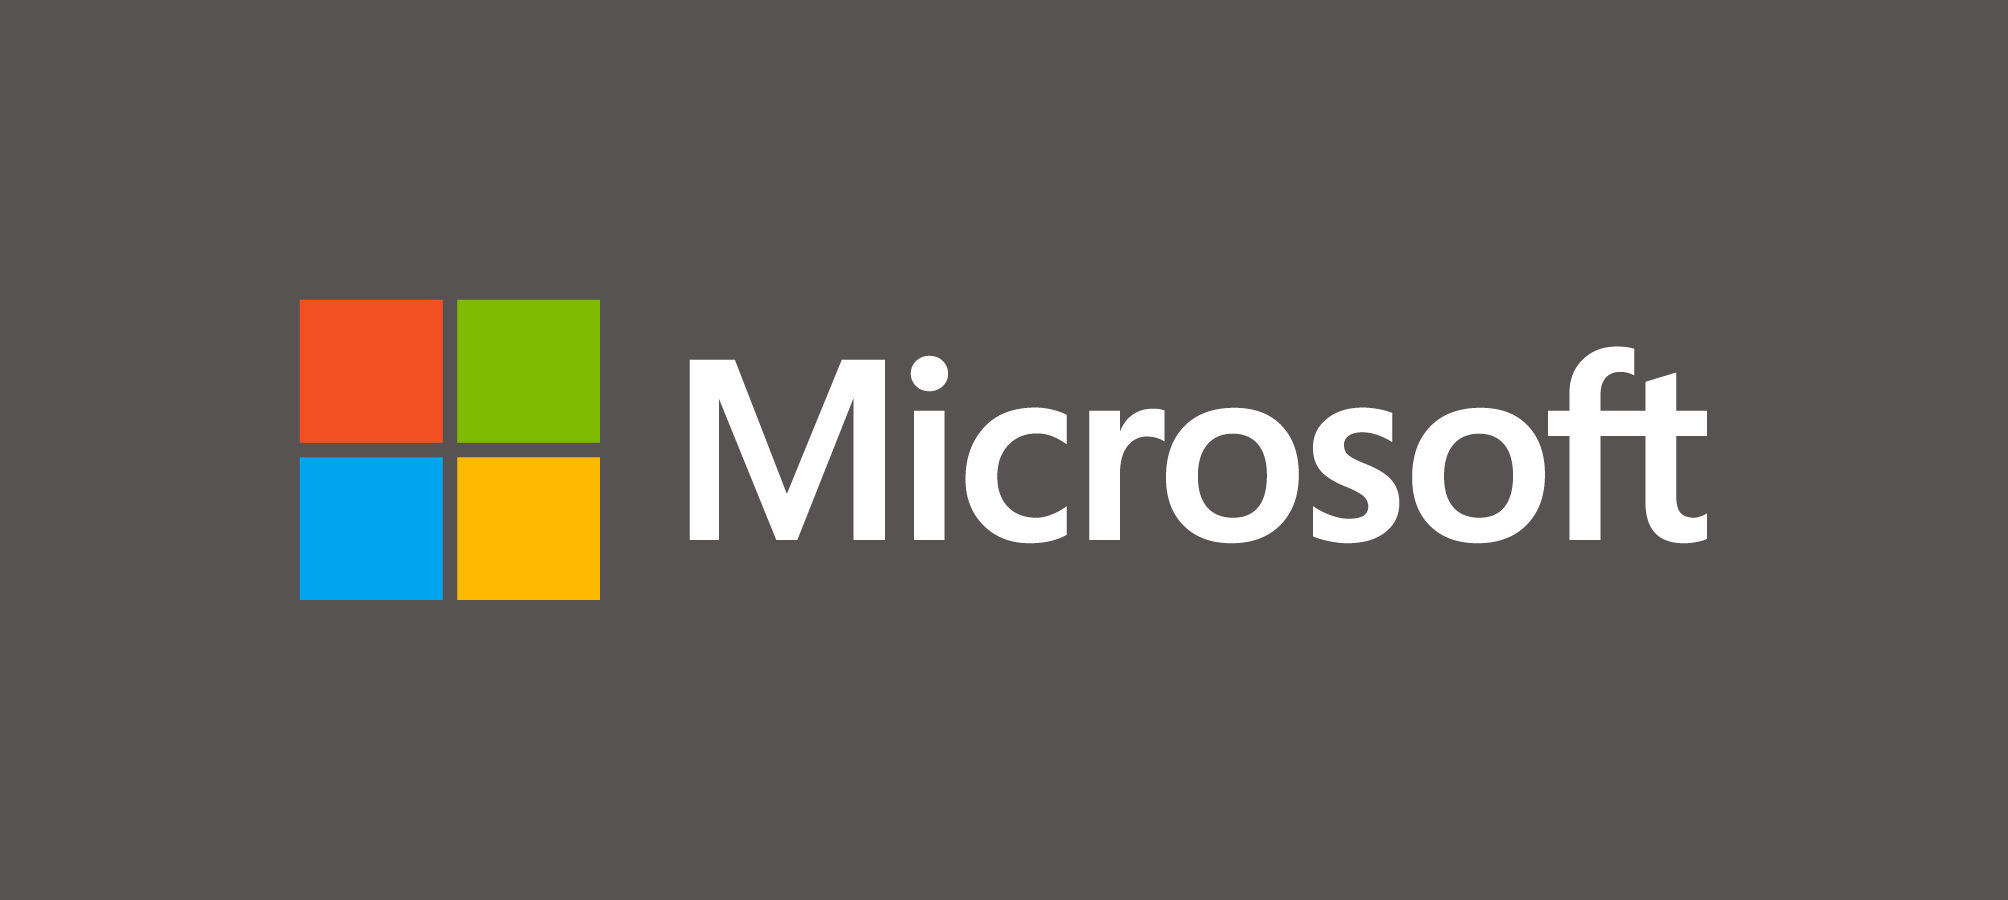 Microsoft Corporate Logo Guidelines | Trademarks - Microsoft, Transparent background PNG HD thumbnail